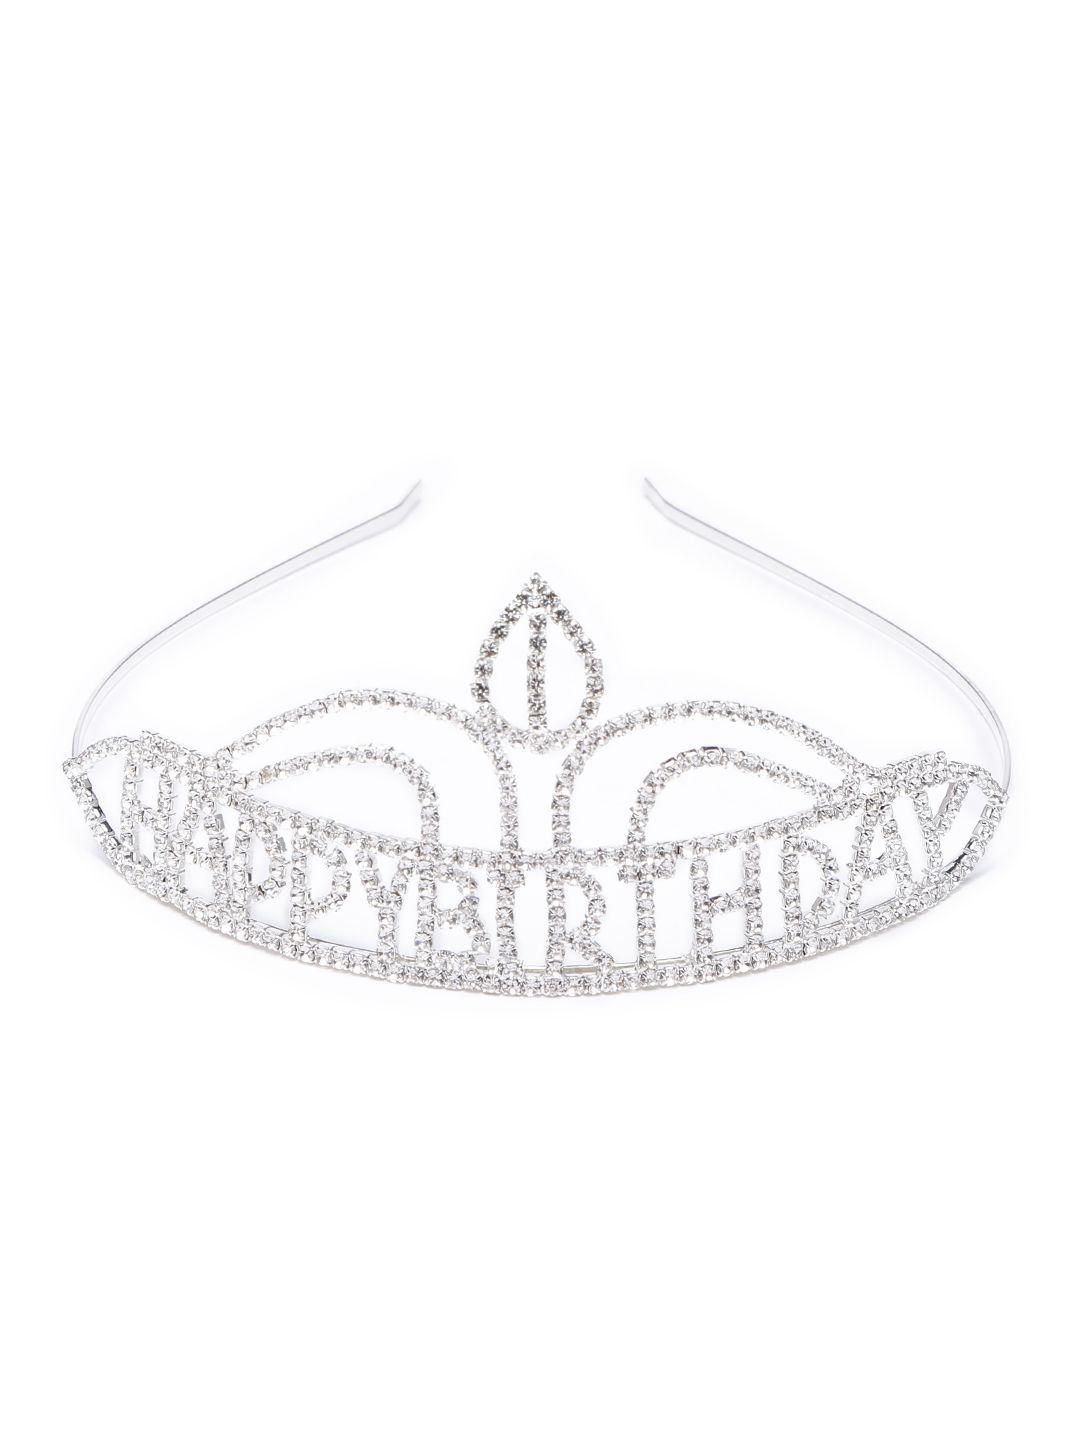 accessher women silver-toned embellished happy birthday tiara